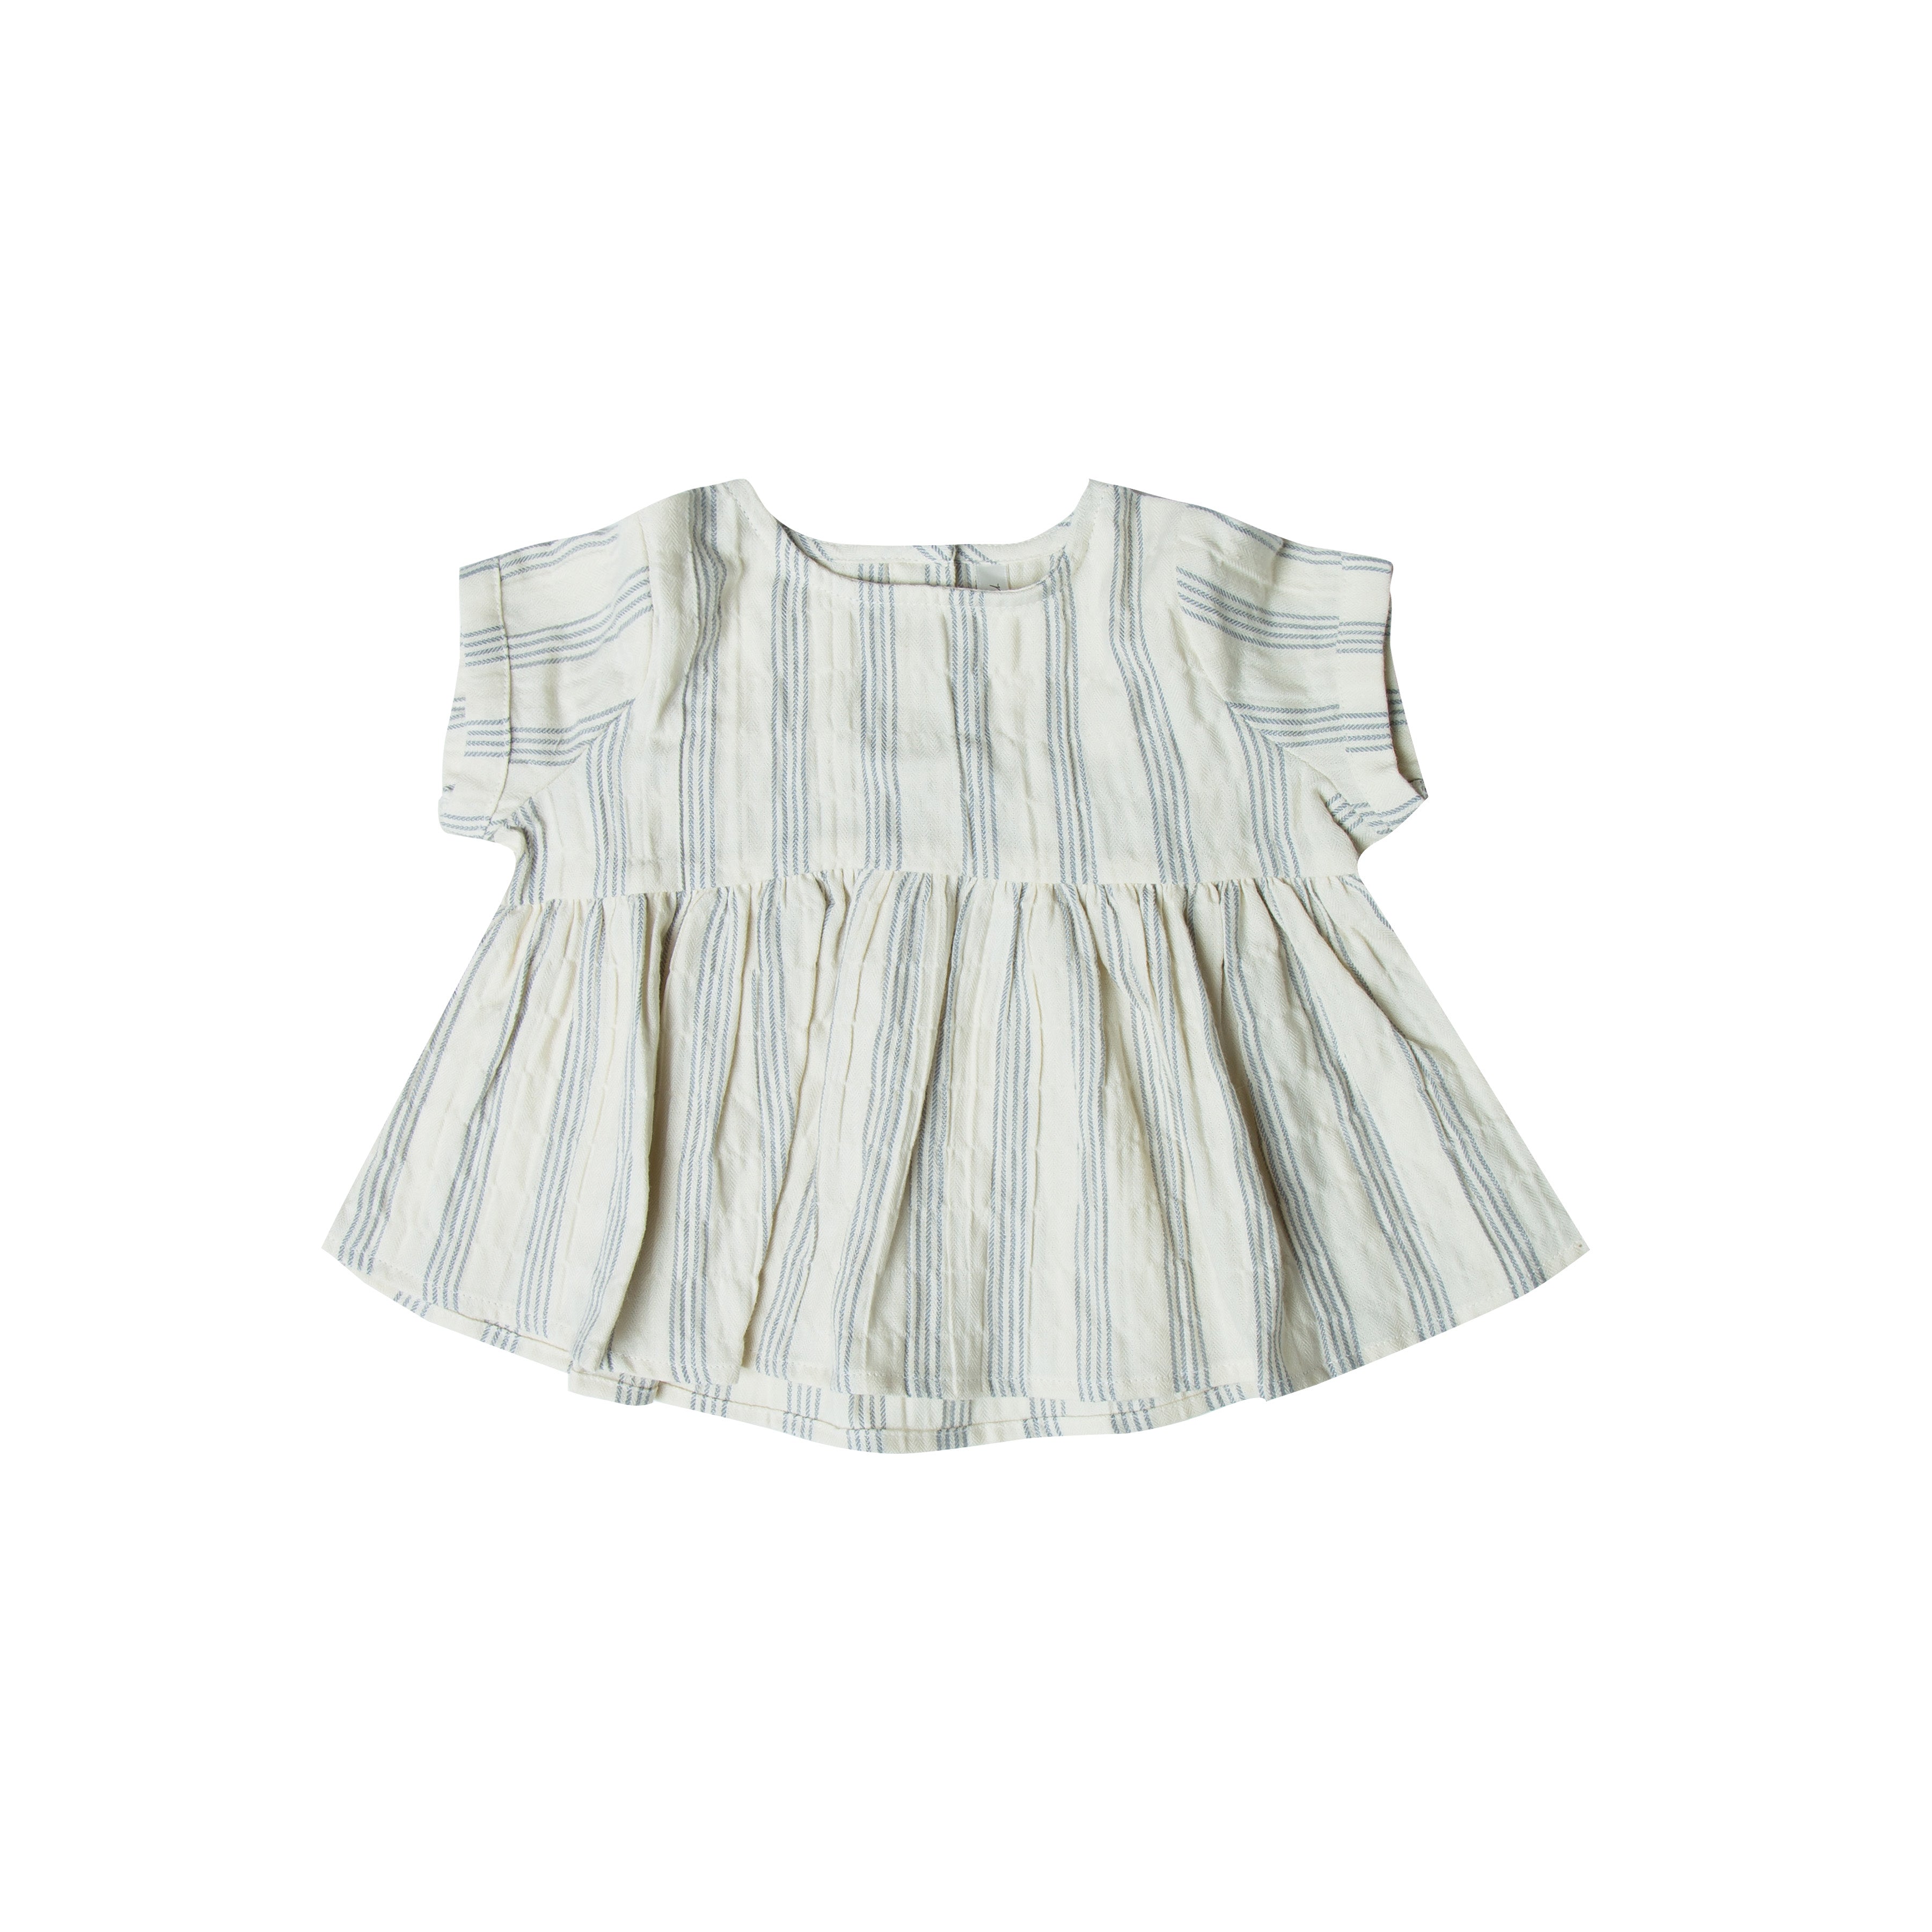 Trendy Rylee and Cru baby dress at Bonjour Baby Baskets